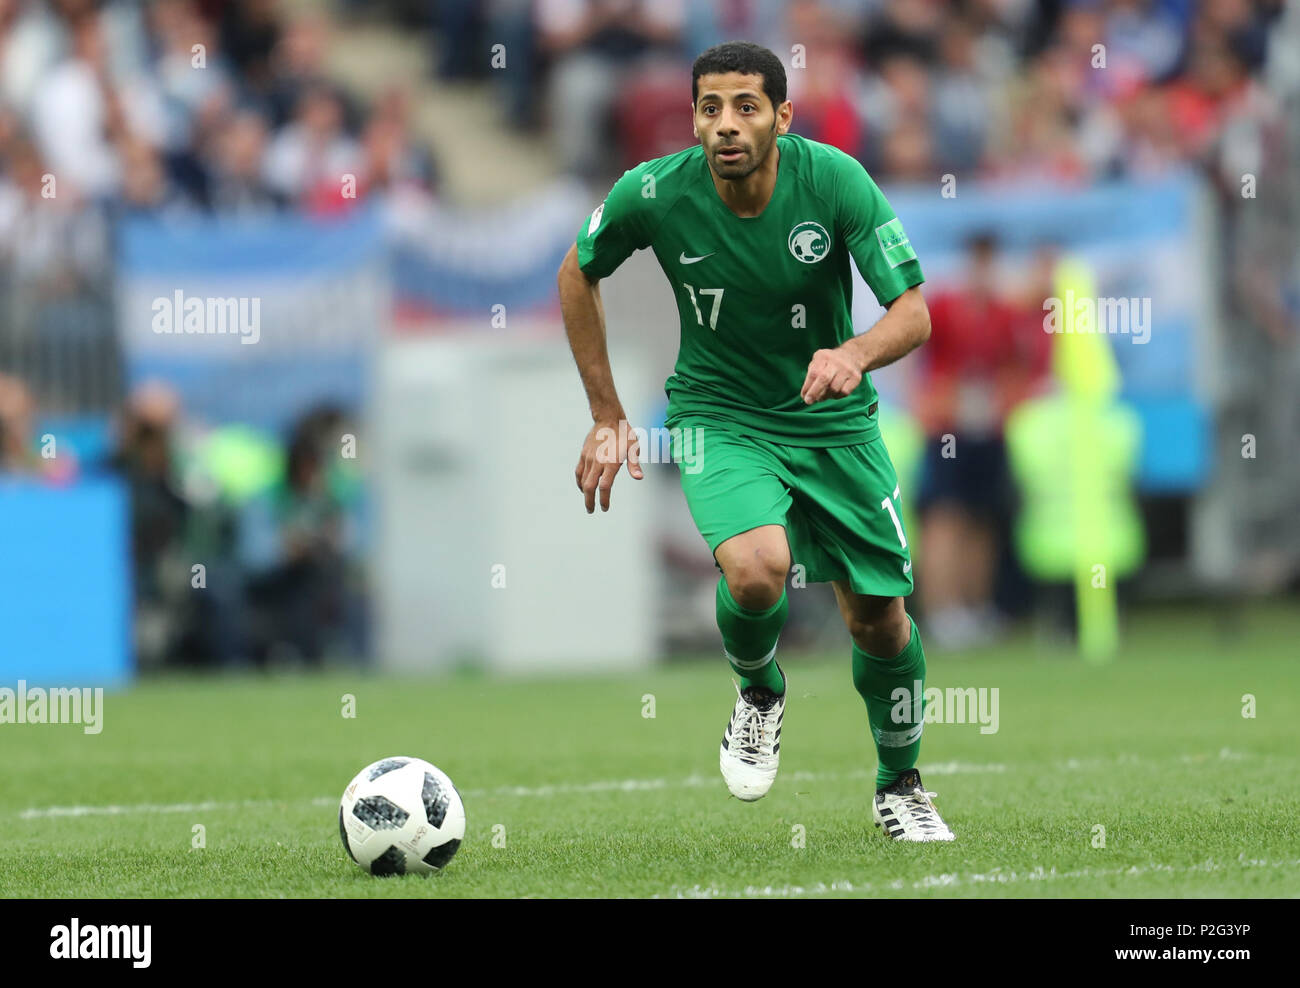 Taisir Al-Jassim SAUDI ARABIA RUSSIA V SAUDI ARABIA, 2018 FIFA WORLD CUP RUSSIA 14 June 2018 GBC8061 Russia v Saudi Arabia 2018 FIFA World Cup Russia STRICTLY EDITORIAL USE ONLY. If The Player/Players Depicted In This Image Is/Are Playing For An English Club Or The England National Team. Then This Image May Only Be Used For Editorial Purposes. No Commercial Use. The Following Usages Are Also Restricted EVEN IF IN AN EDITORIAL CONTEXT: Use in conjuction with, or part of, any unauthorized audio, video, data, fixture lists, club/league logos, Betting, Games or any 'live' servi Stock Photo